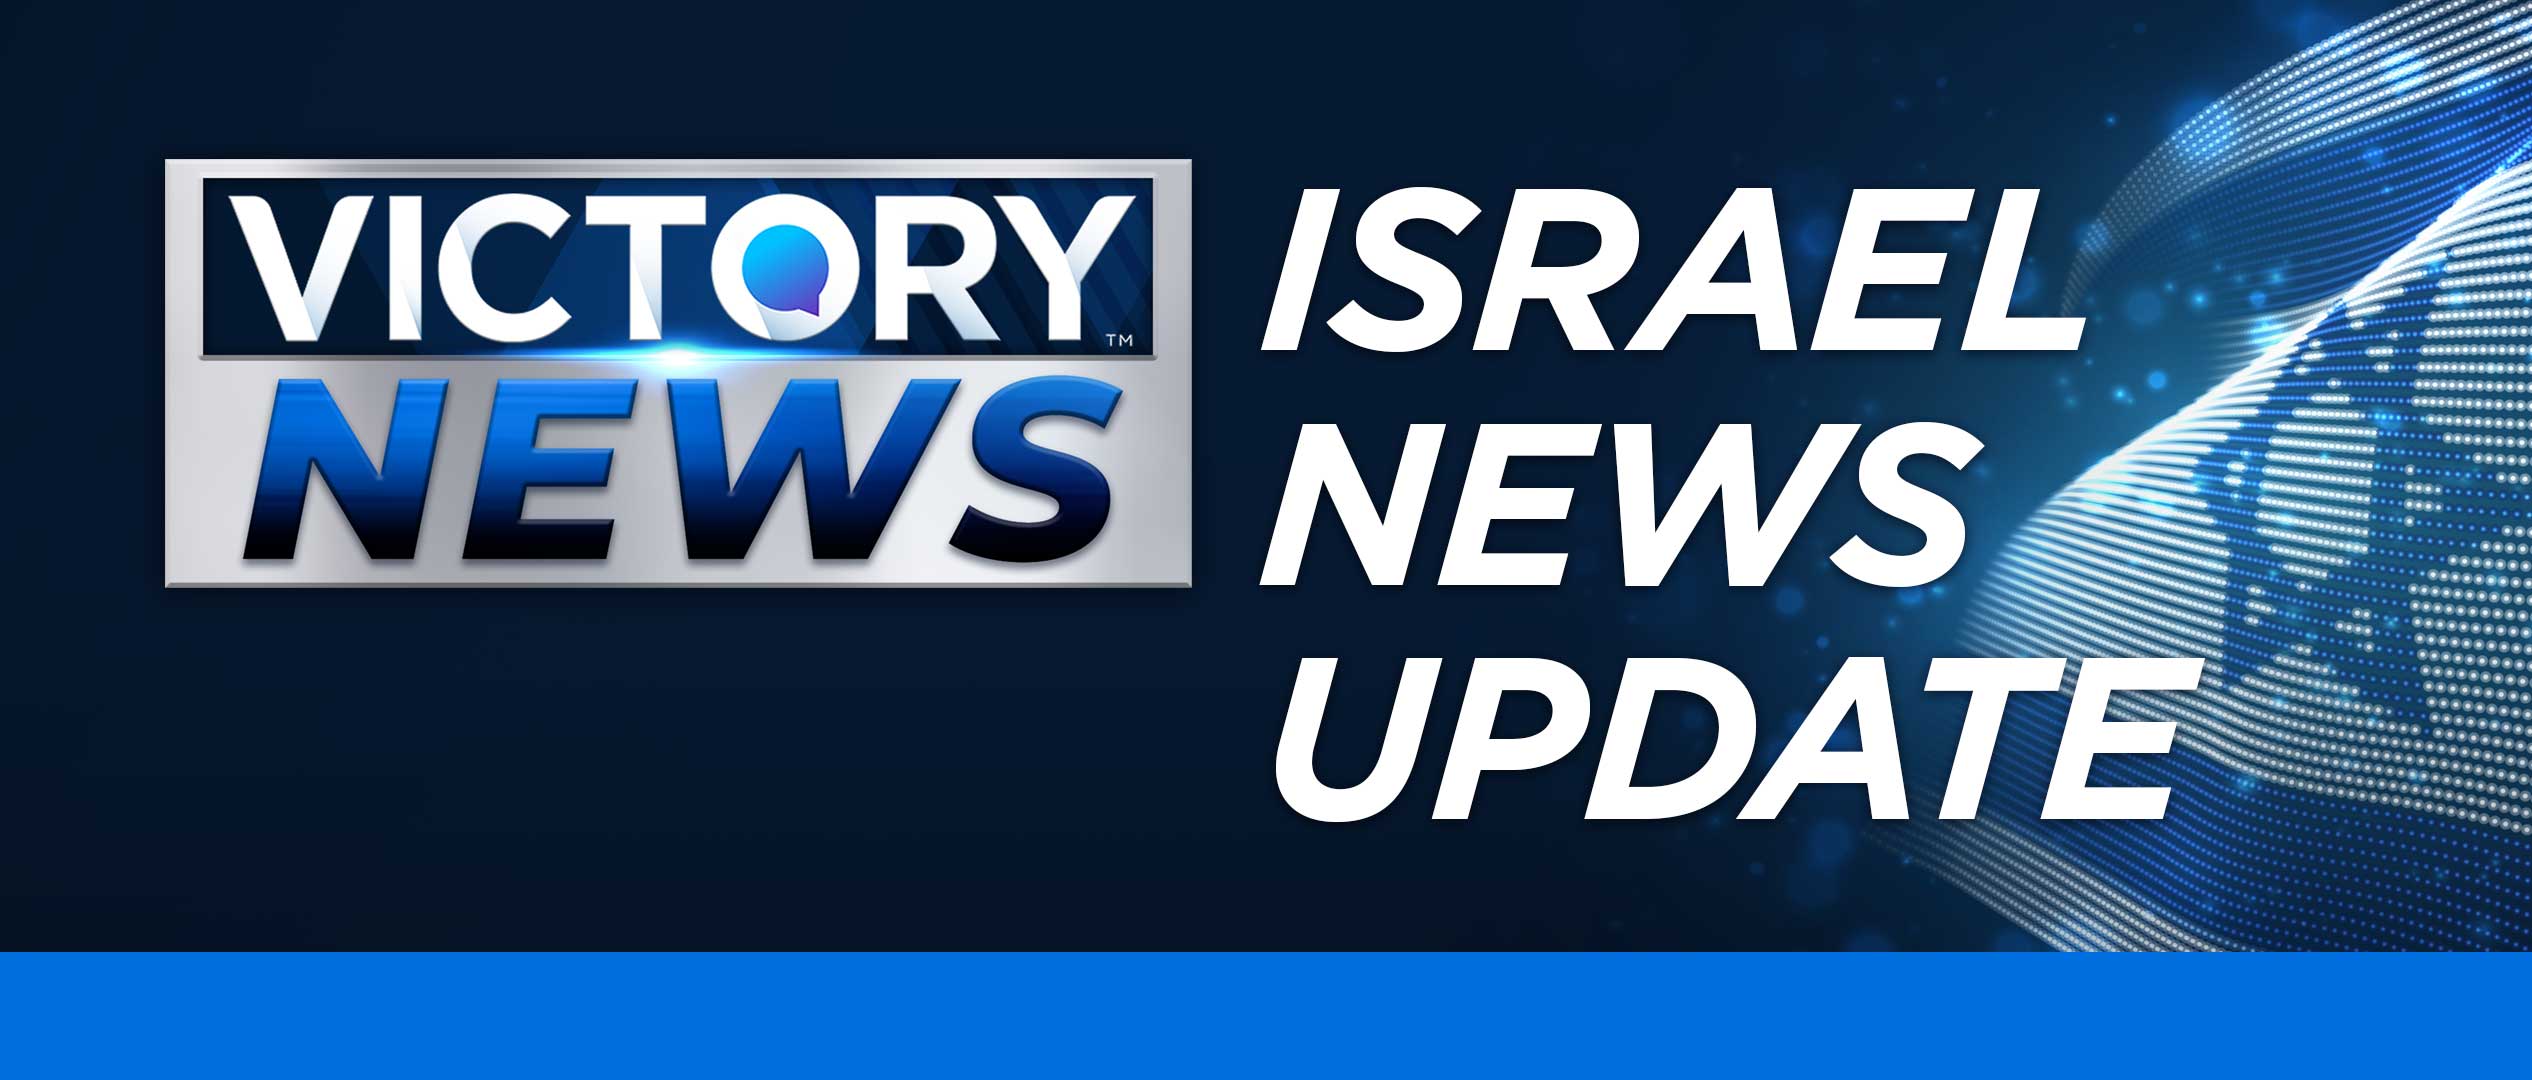 Israel News Archives - Victory News